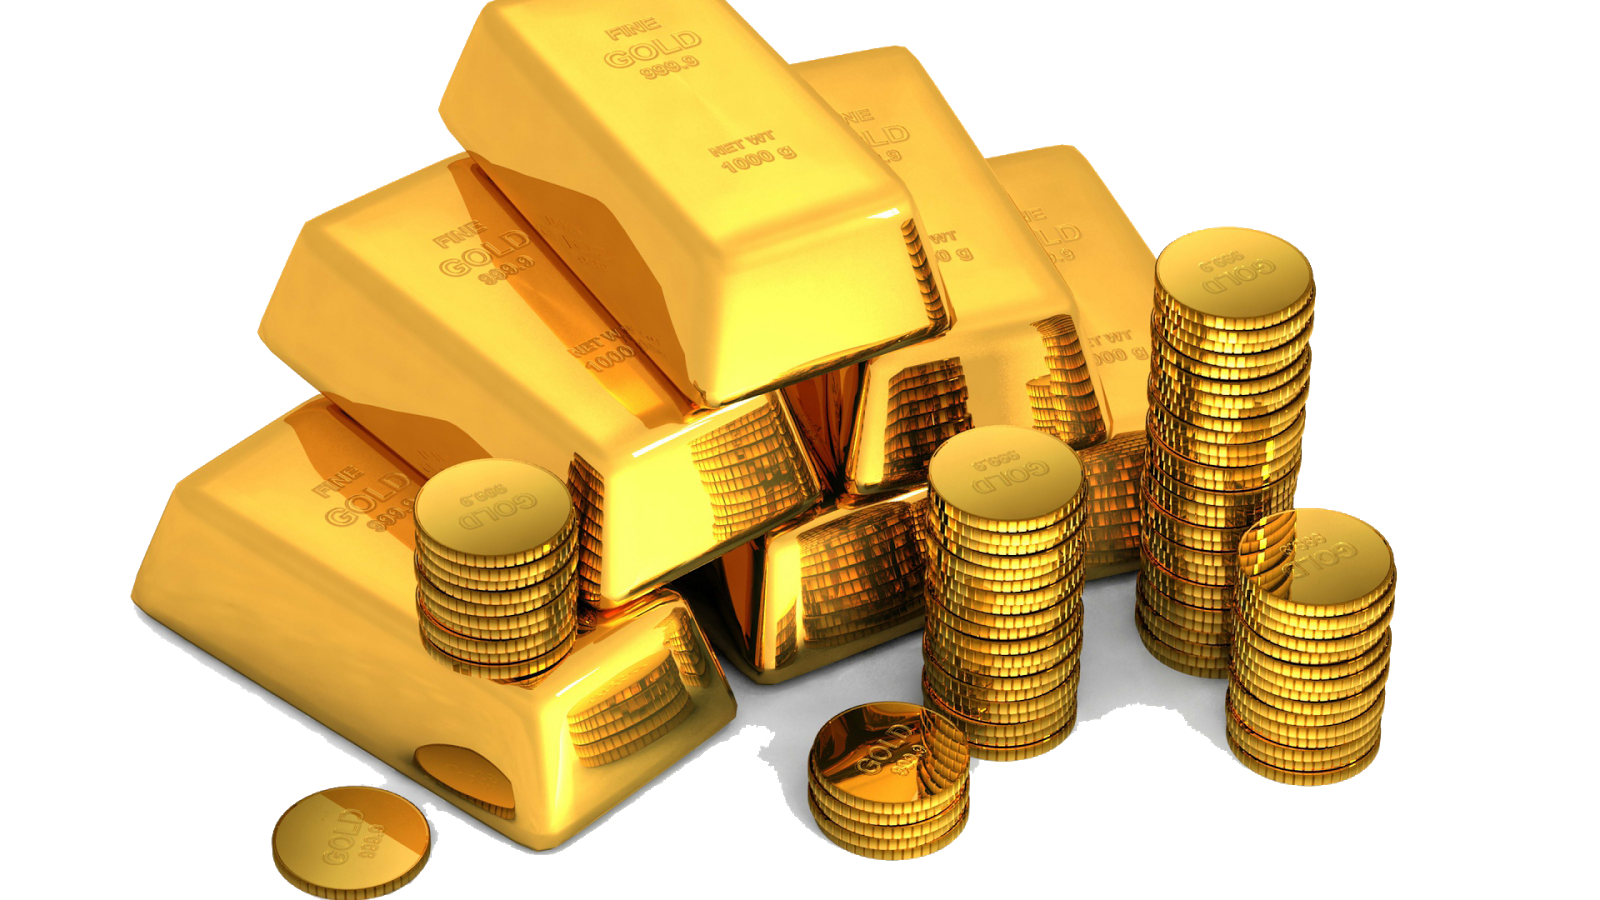 Gold_Bullion_Coins_White_Background_Money_80253_1920X1080 - Gold, Transparent background PNG HD thumbnail